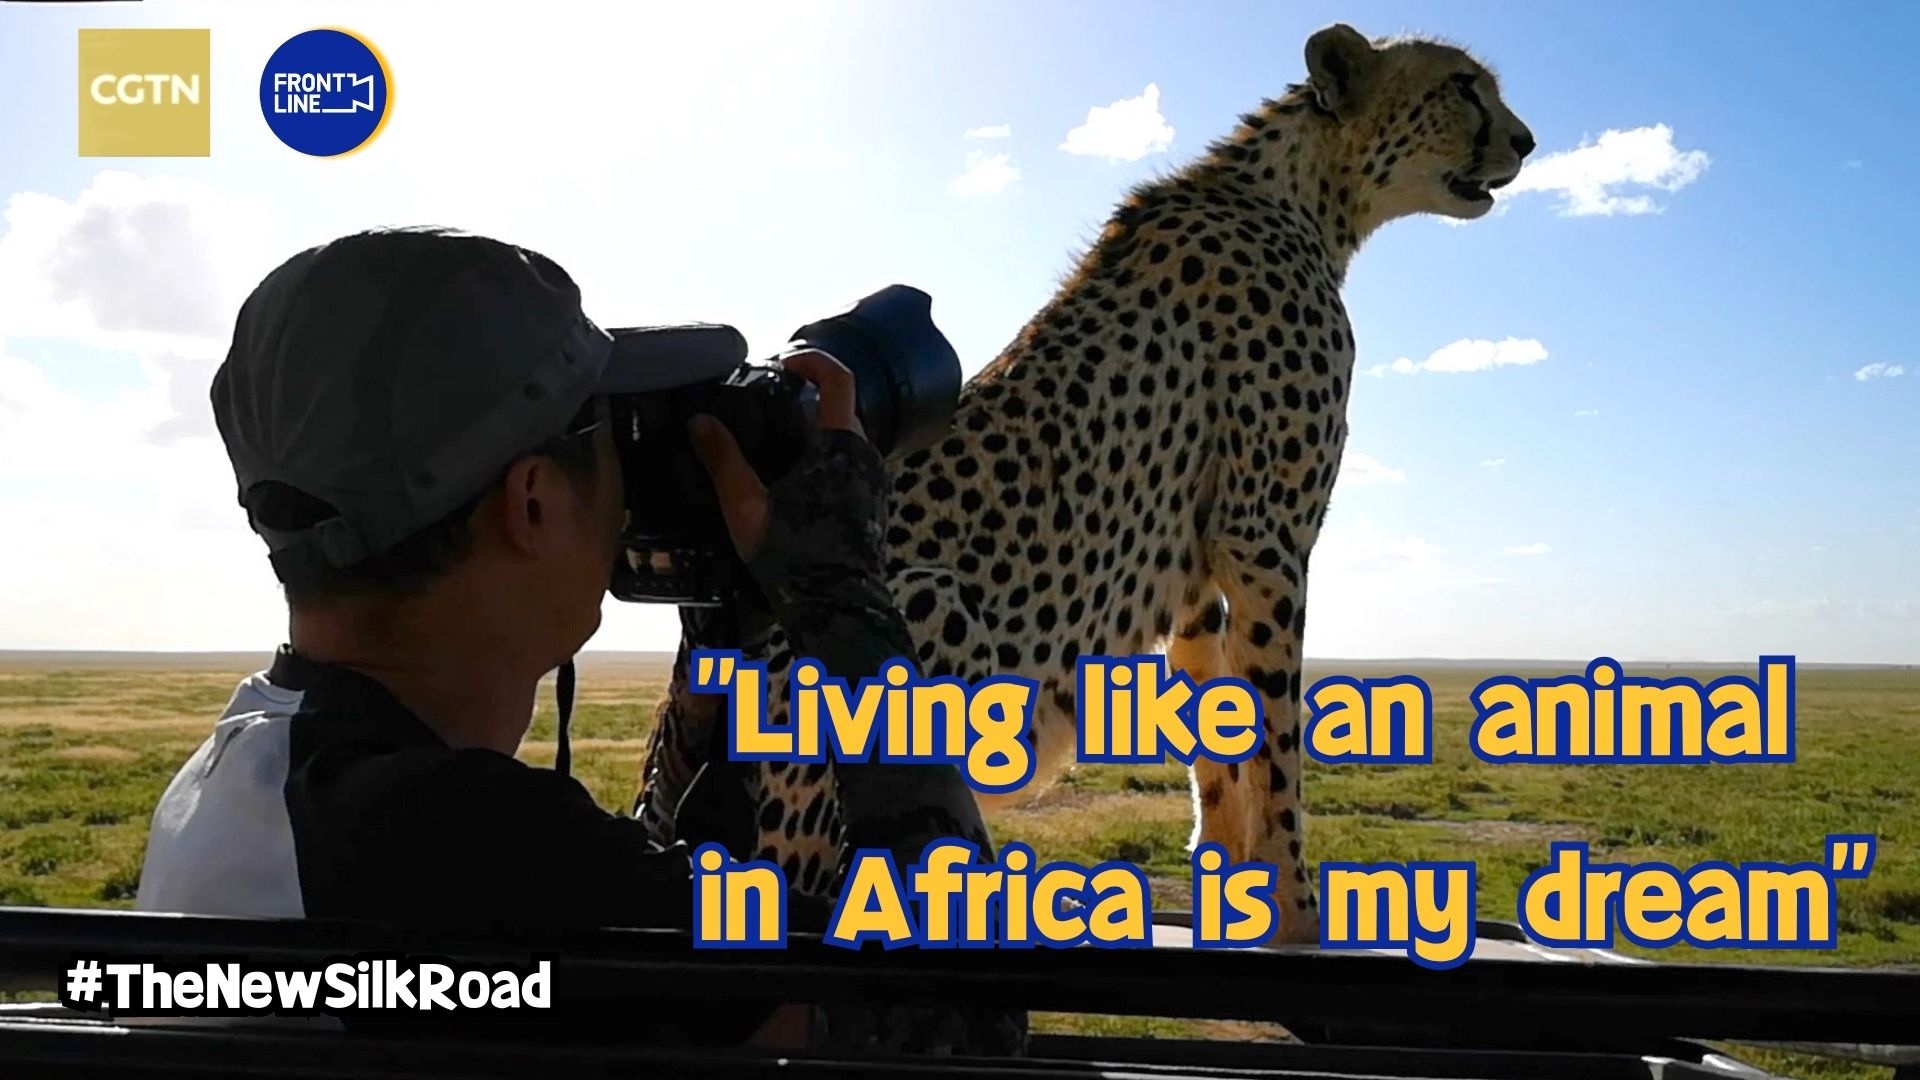 'Living like an animal in Africa is my dream'